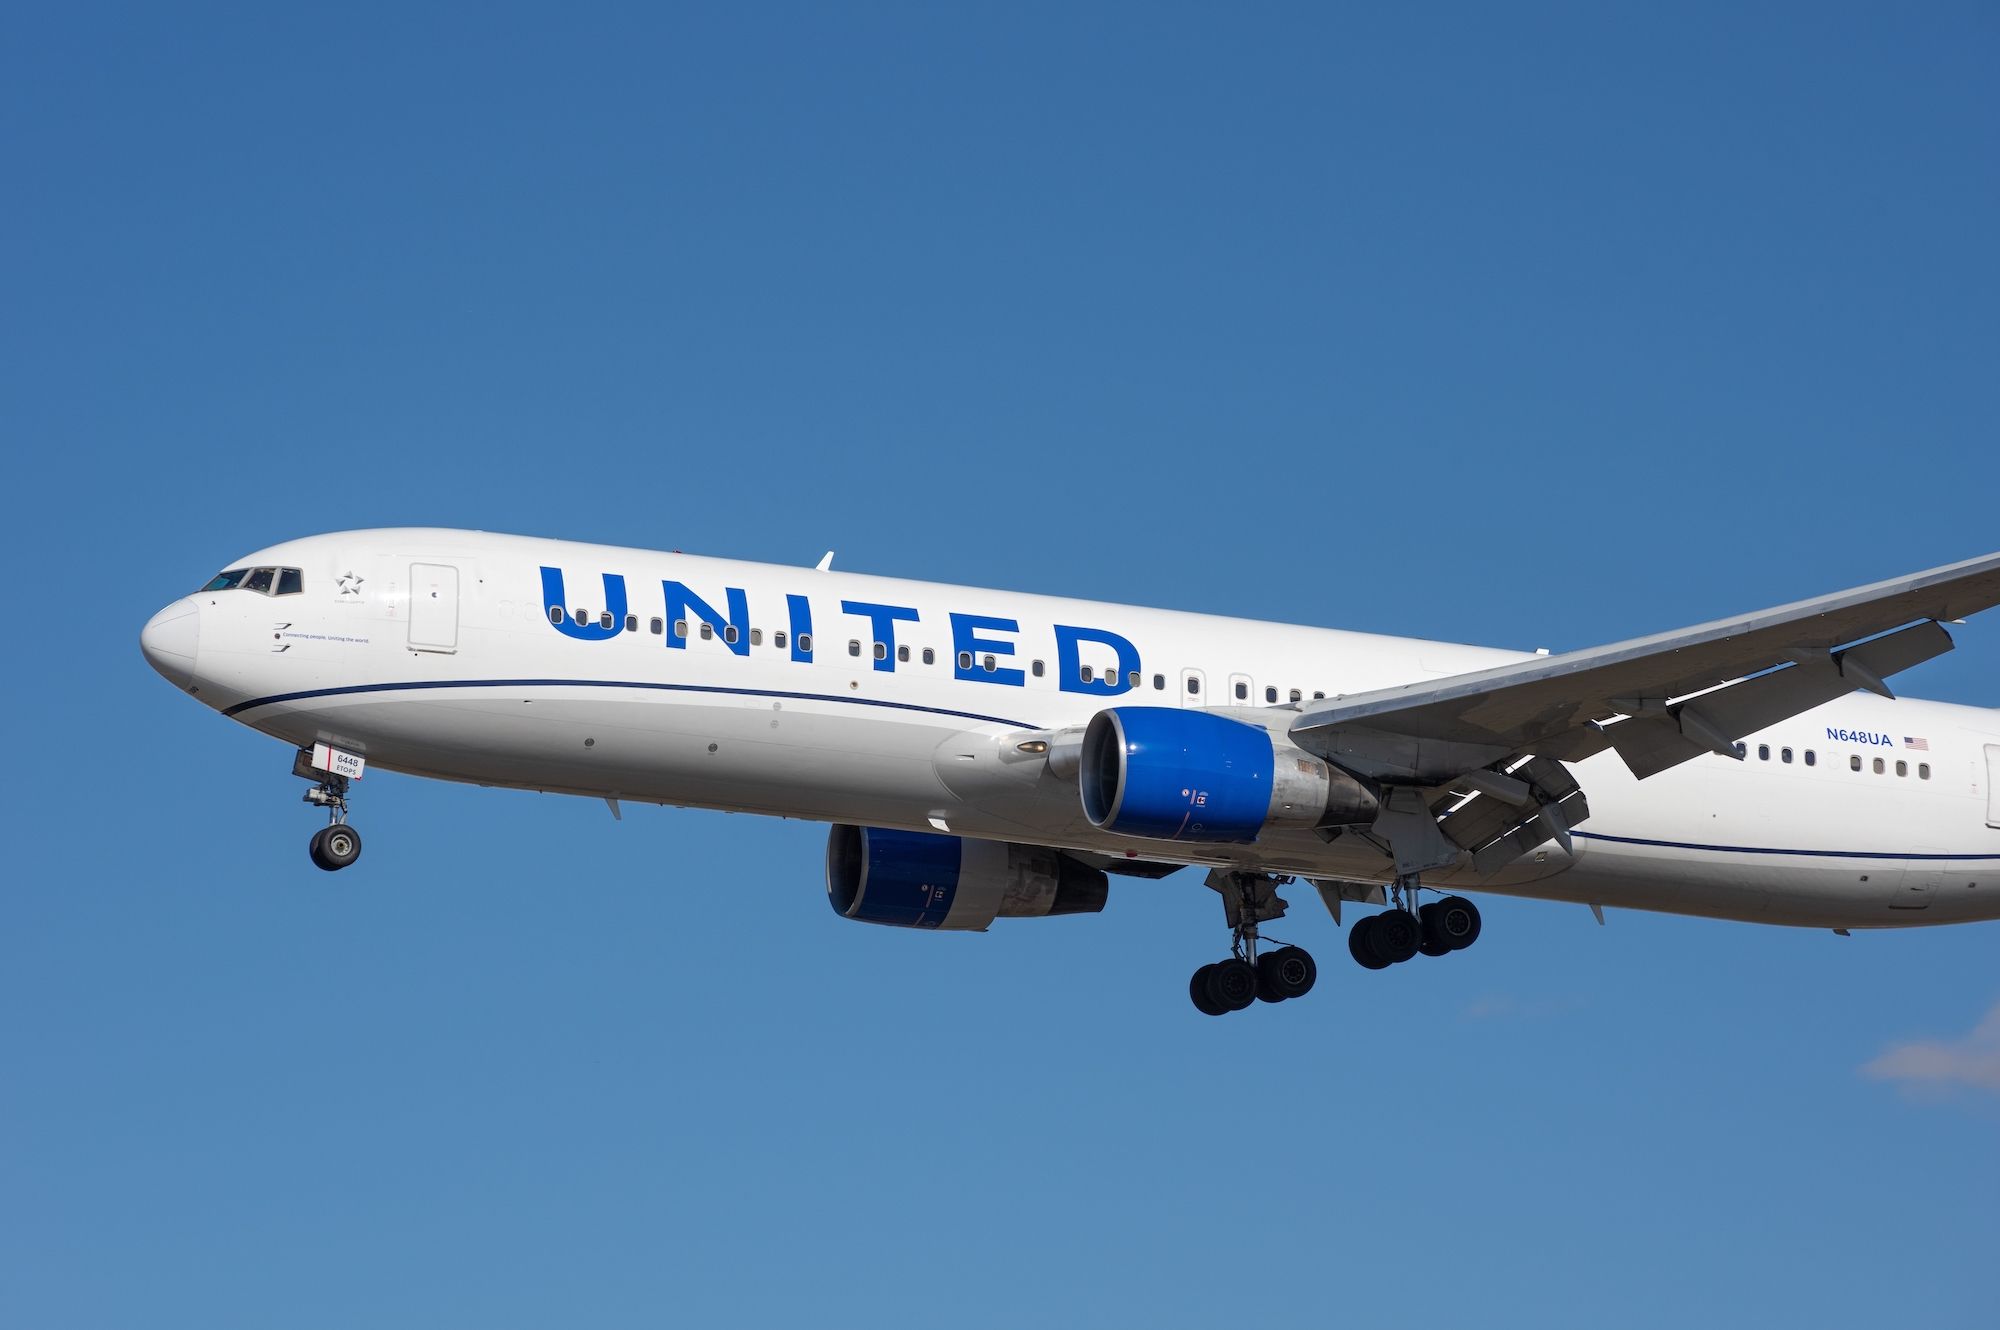 A United Airlines Boeing 767 soars in the sky.